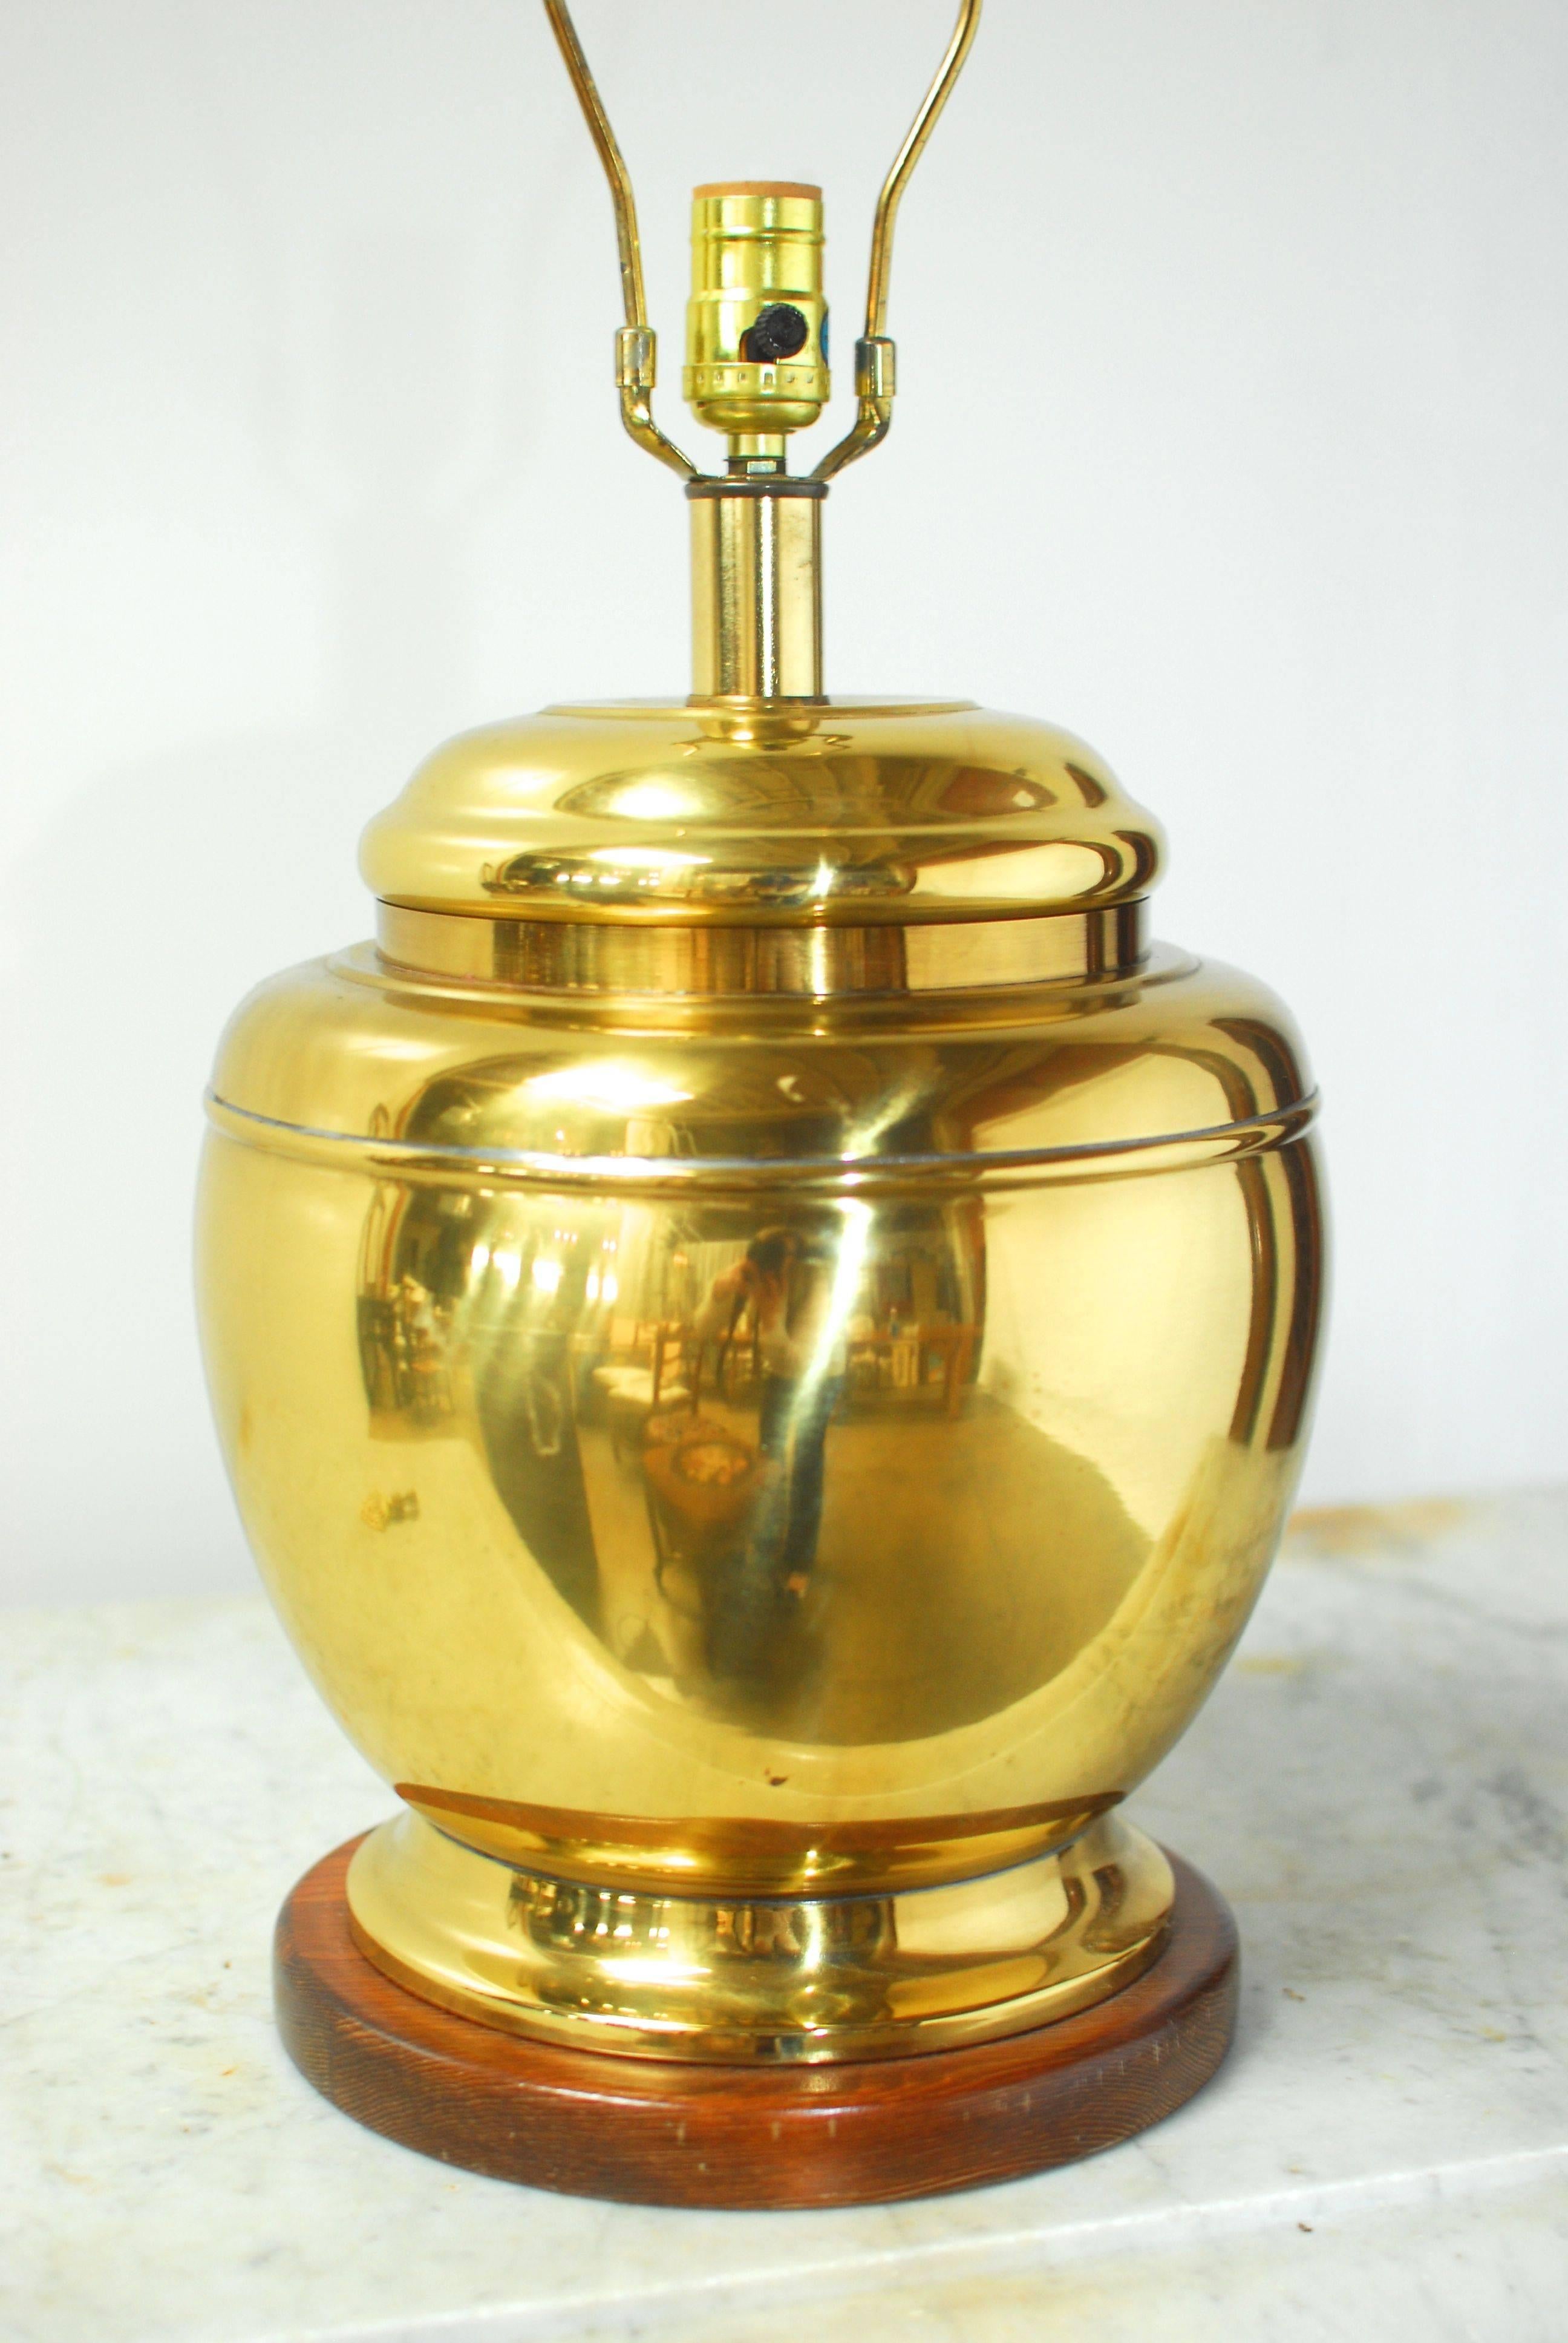 Hollywood Regency style brass table lamp with a lidded jar form made in an Asian style. Attributed to Frederick Cooper of Chicago. This table lamp sits on a wooden plinth and includes a harp and finial and no shade. Unique urn shape with a